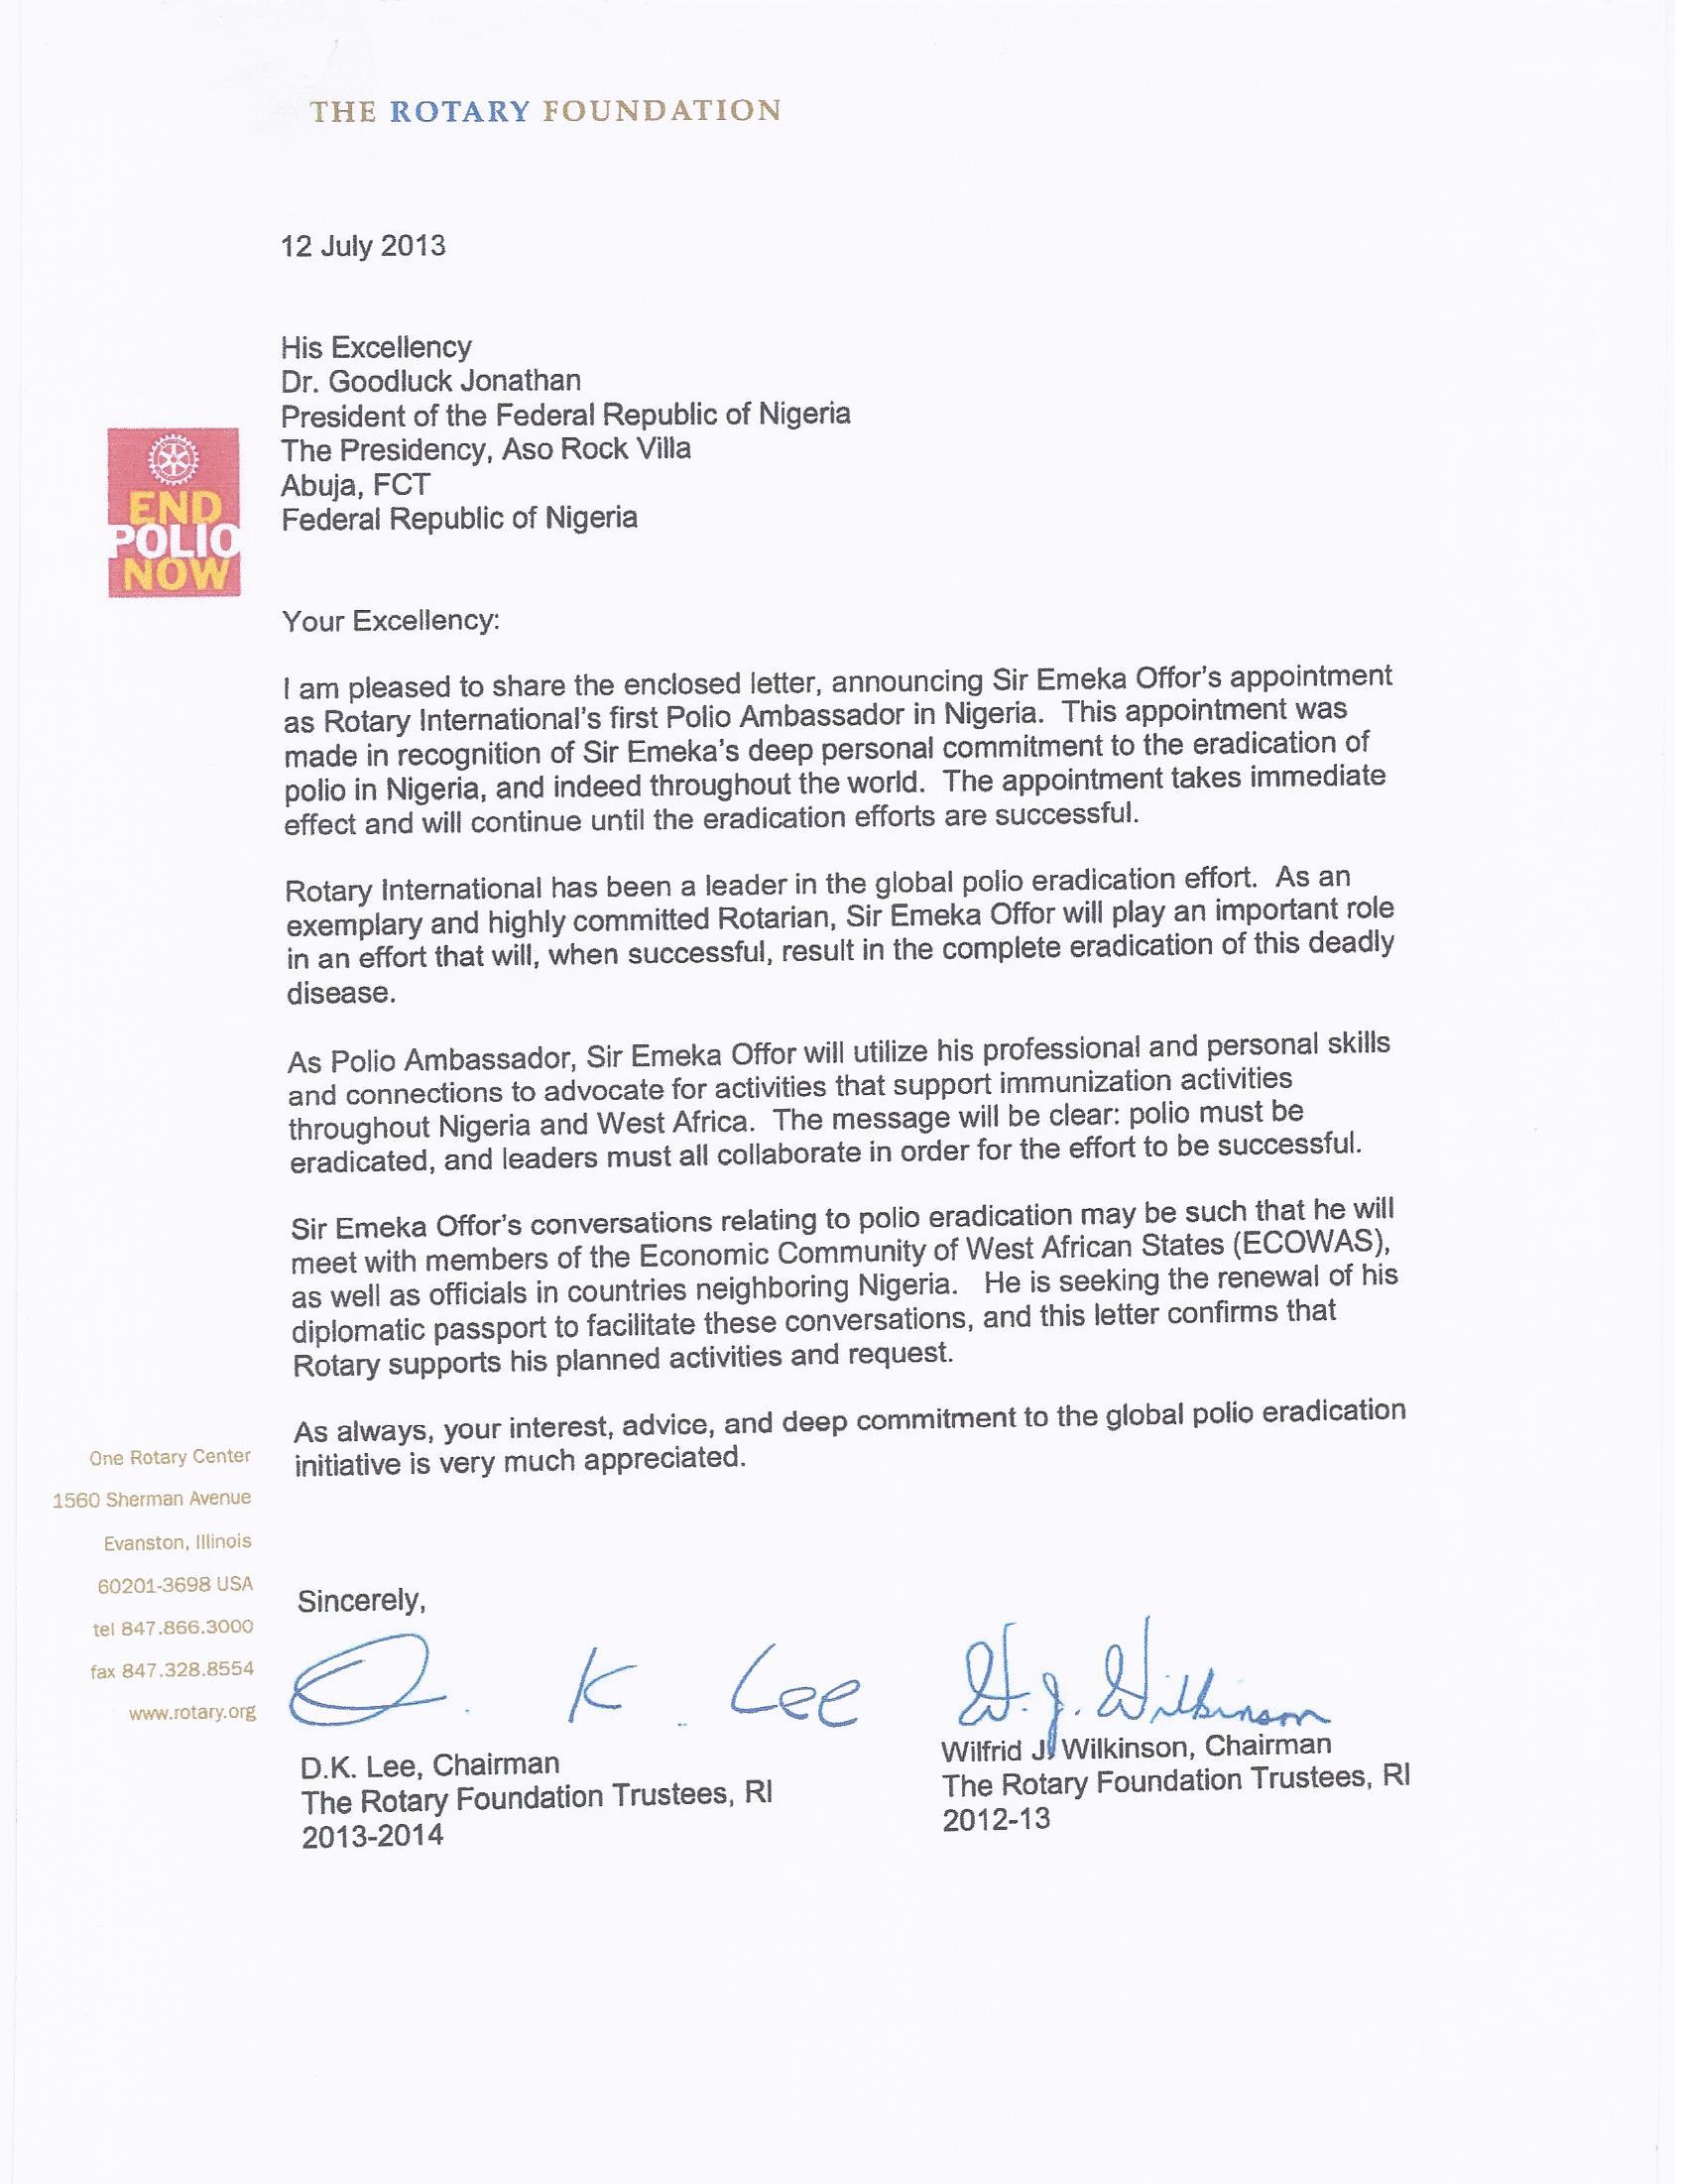 Letter from Rotary International on Polio Eradication